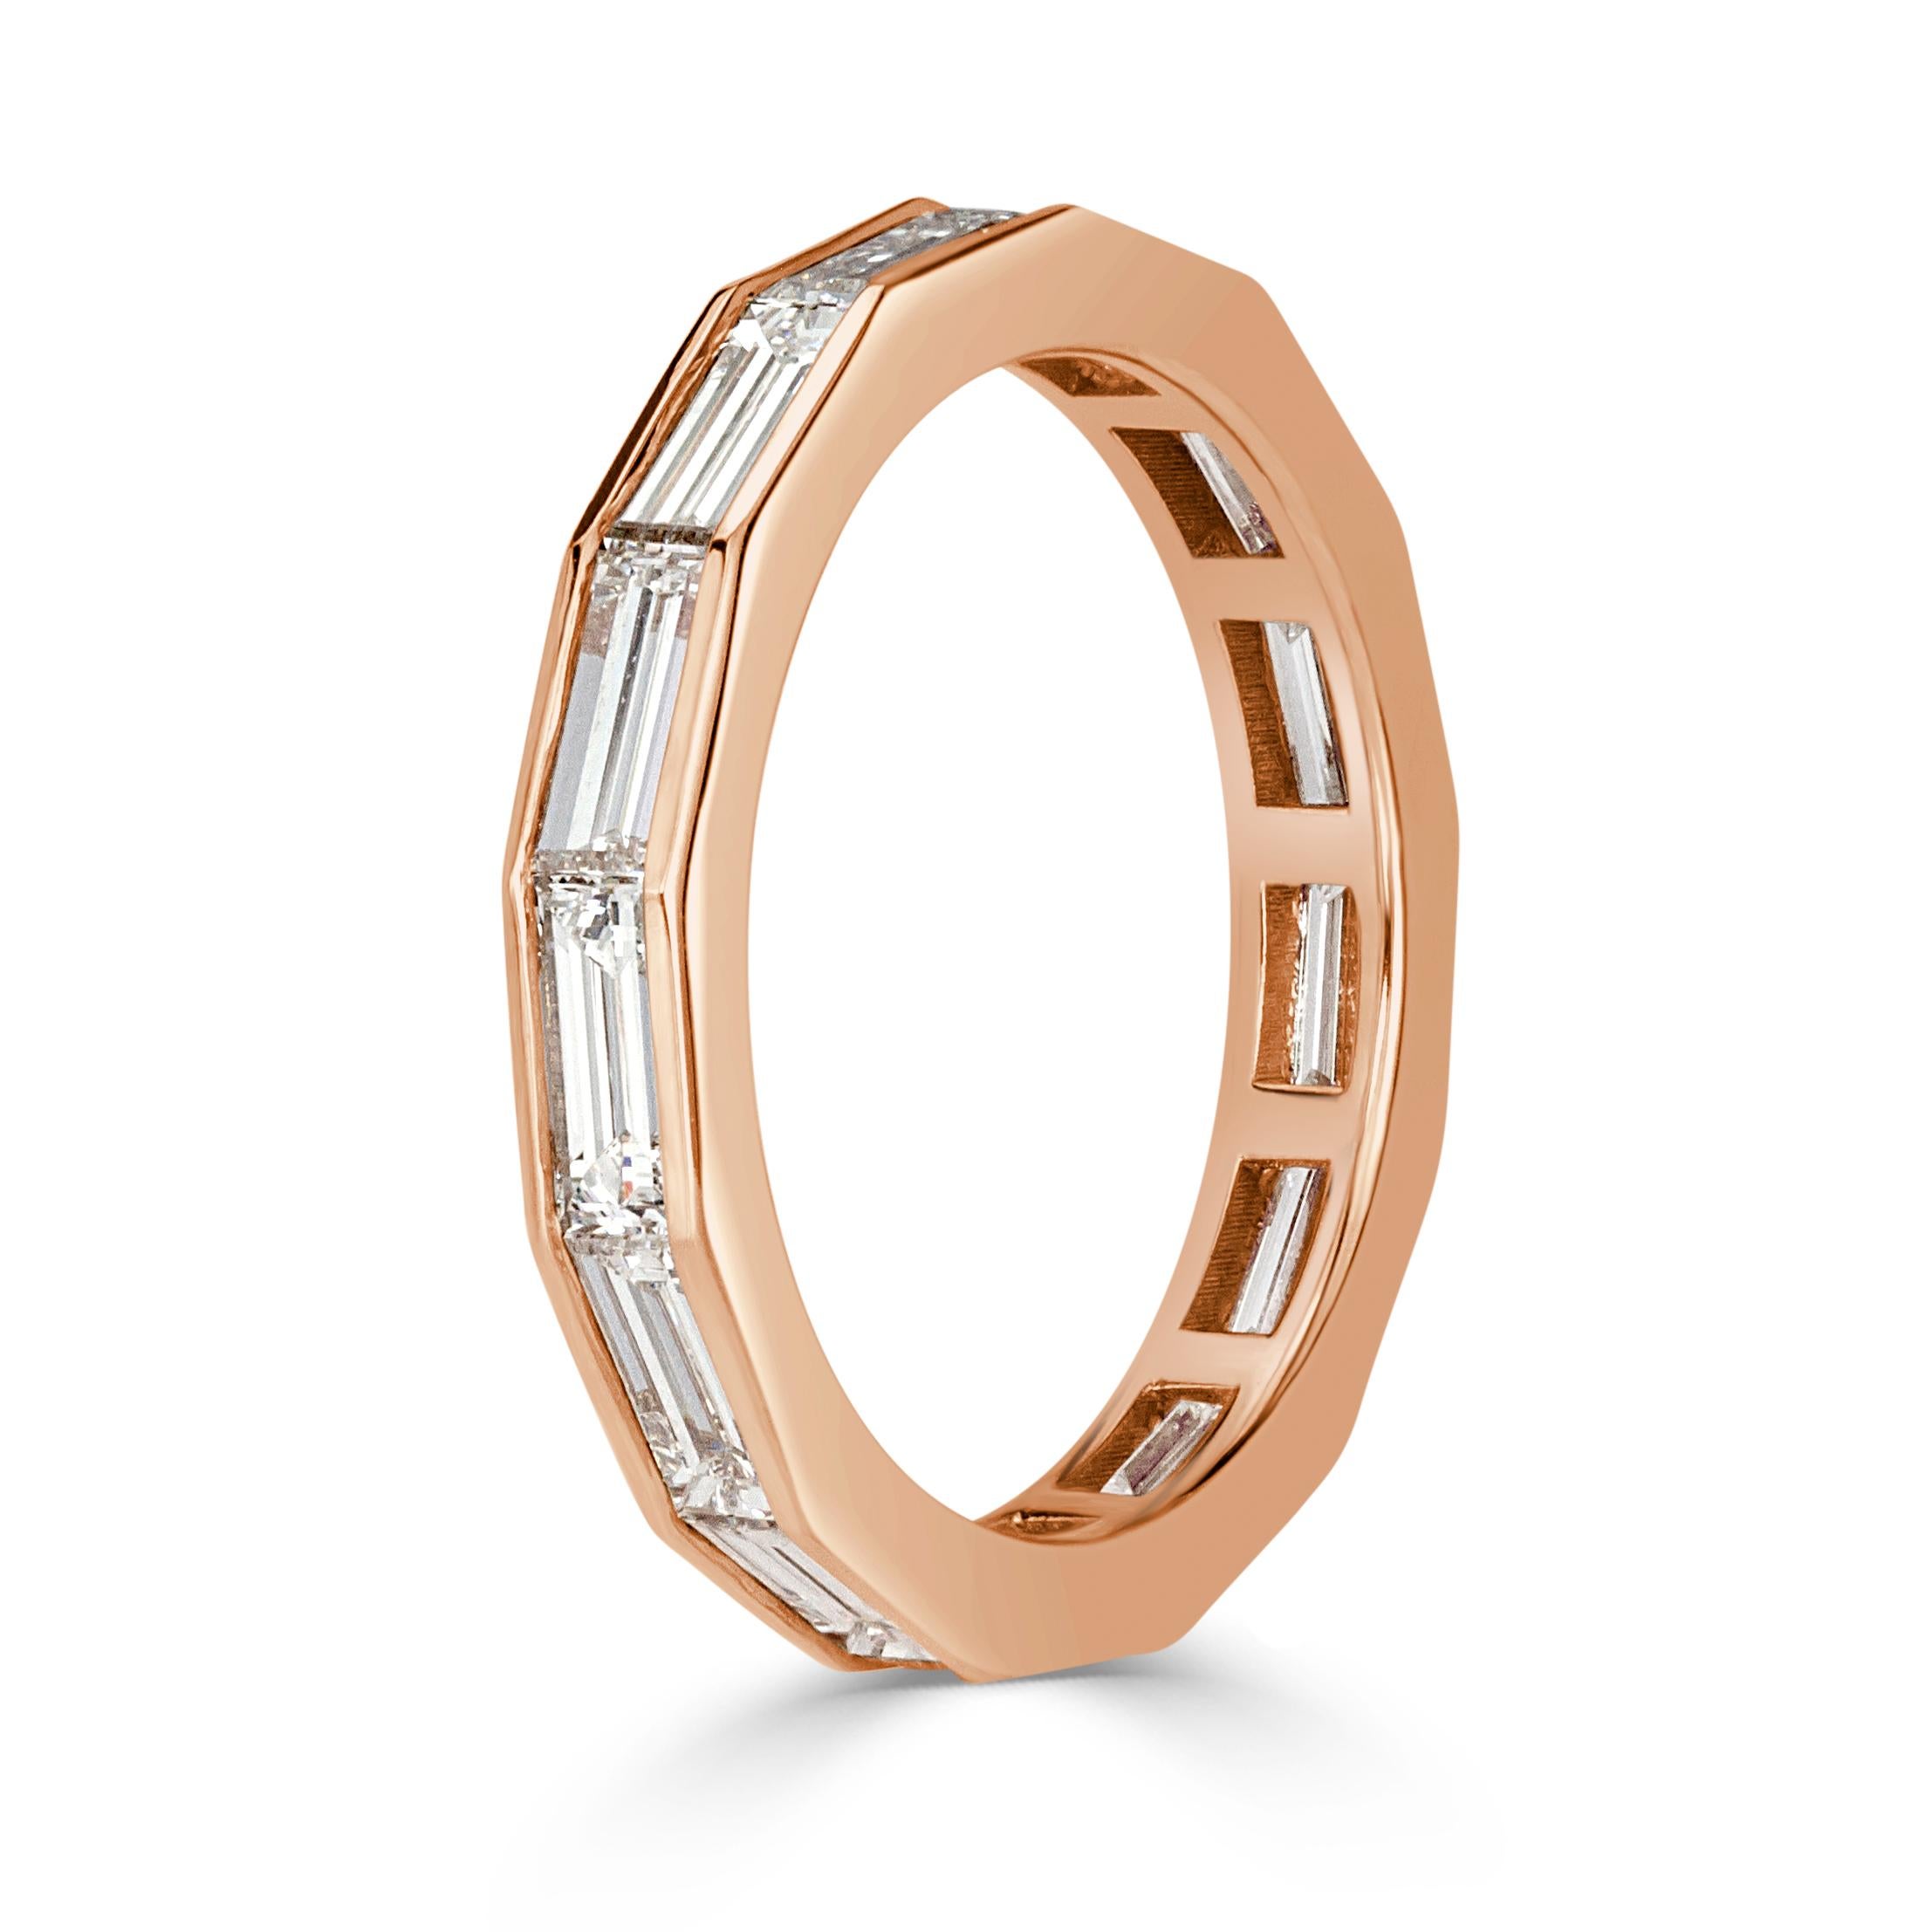 Designed in 18k rose gold, this ravishing diamond eternity band showcases 2.05ct of baguette cut diamonds graded at E-F in color, VVS2-VS1 in clarity. All eternity bands are shown in a size 6.5. We custom craft each eternity band and will create the